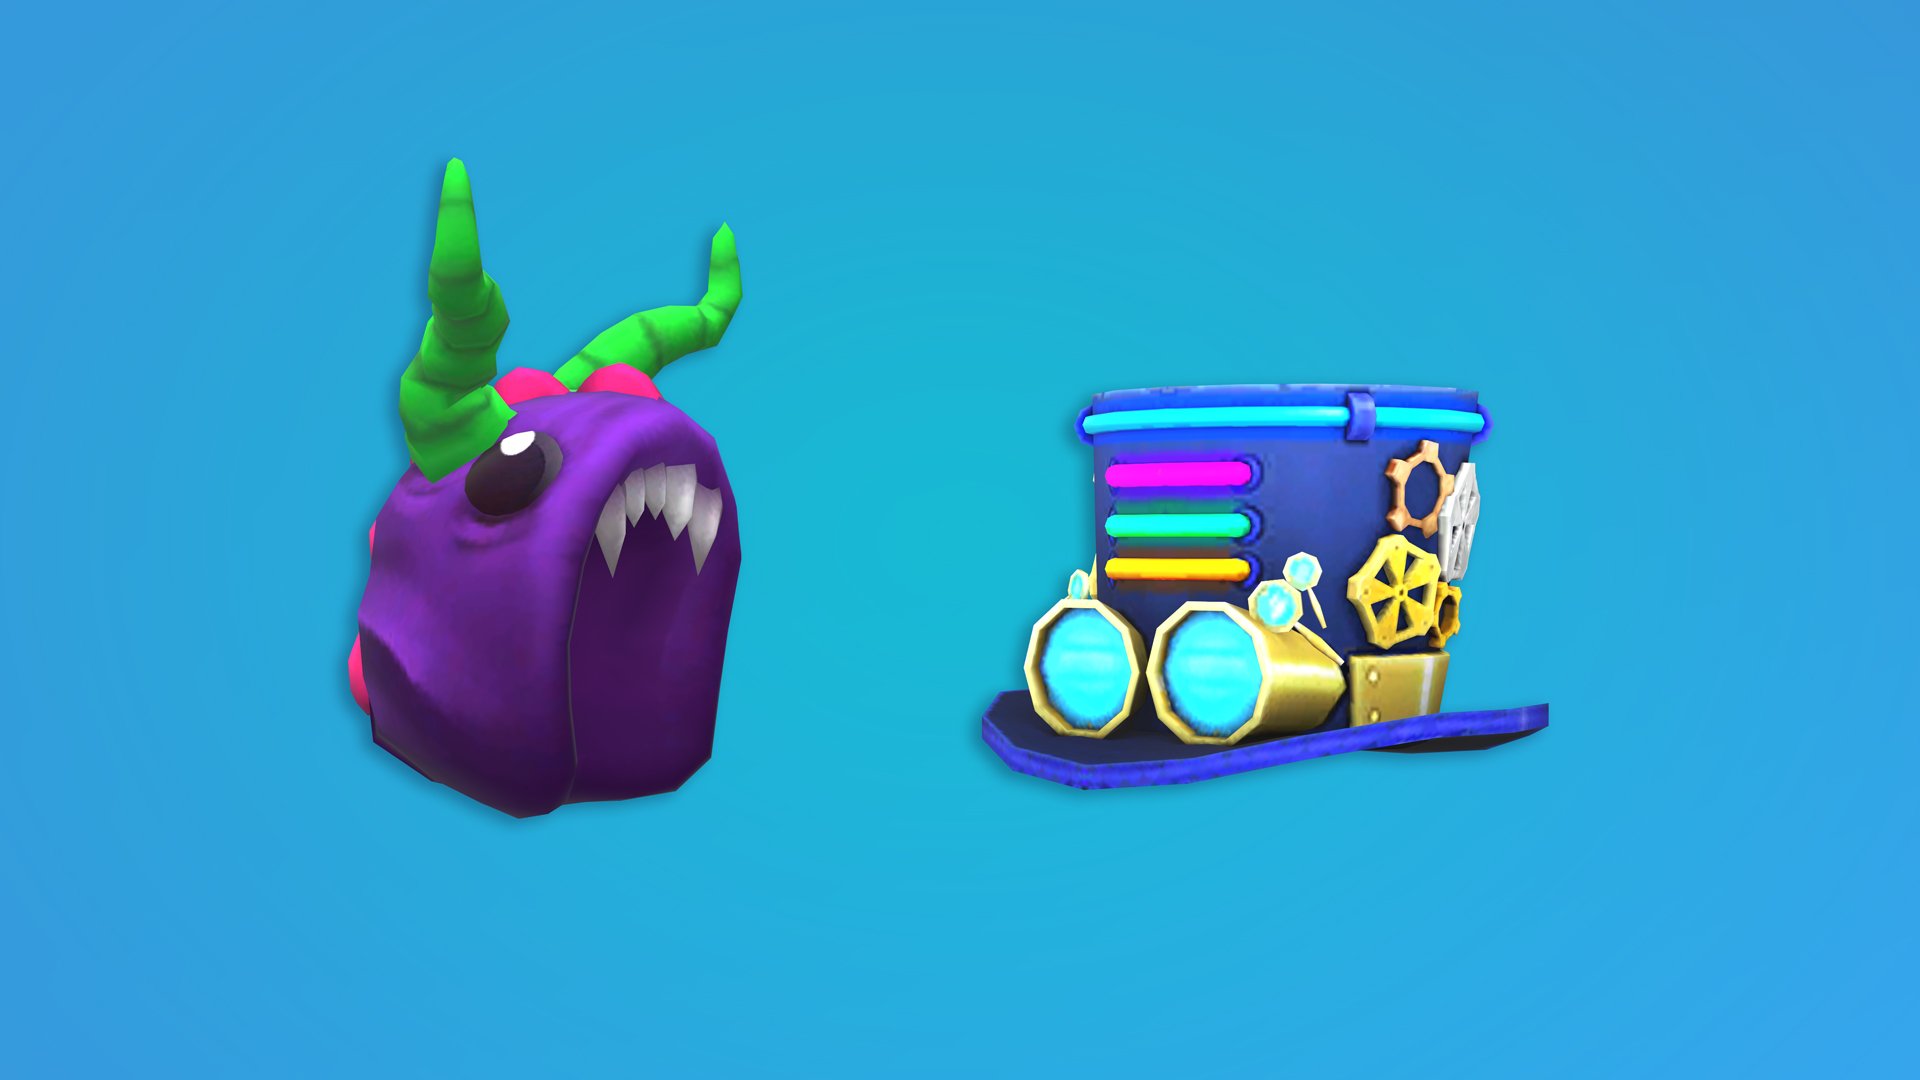 Didi On Twitter Roblox Is Gonna Release These 2 Items For Free On The Avatar Shop Next Friday Before The Bloxys Start - eggplant roblox